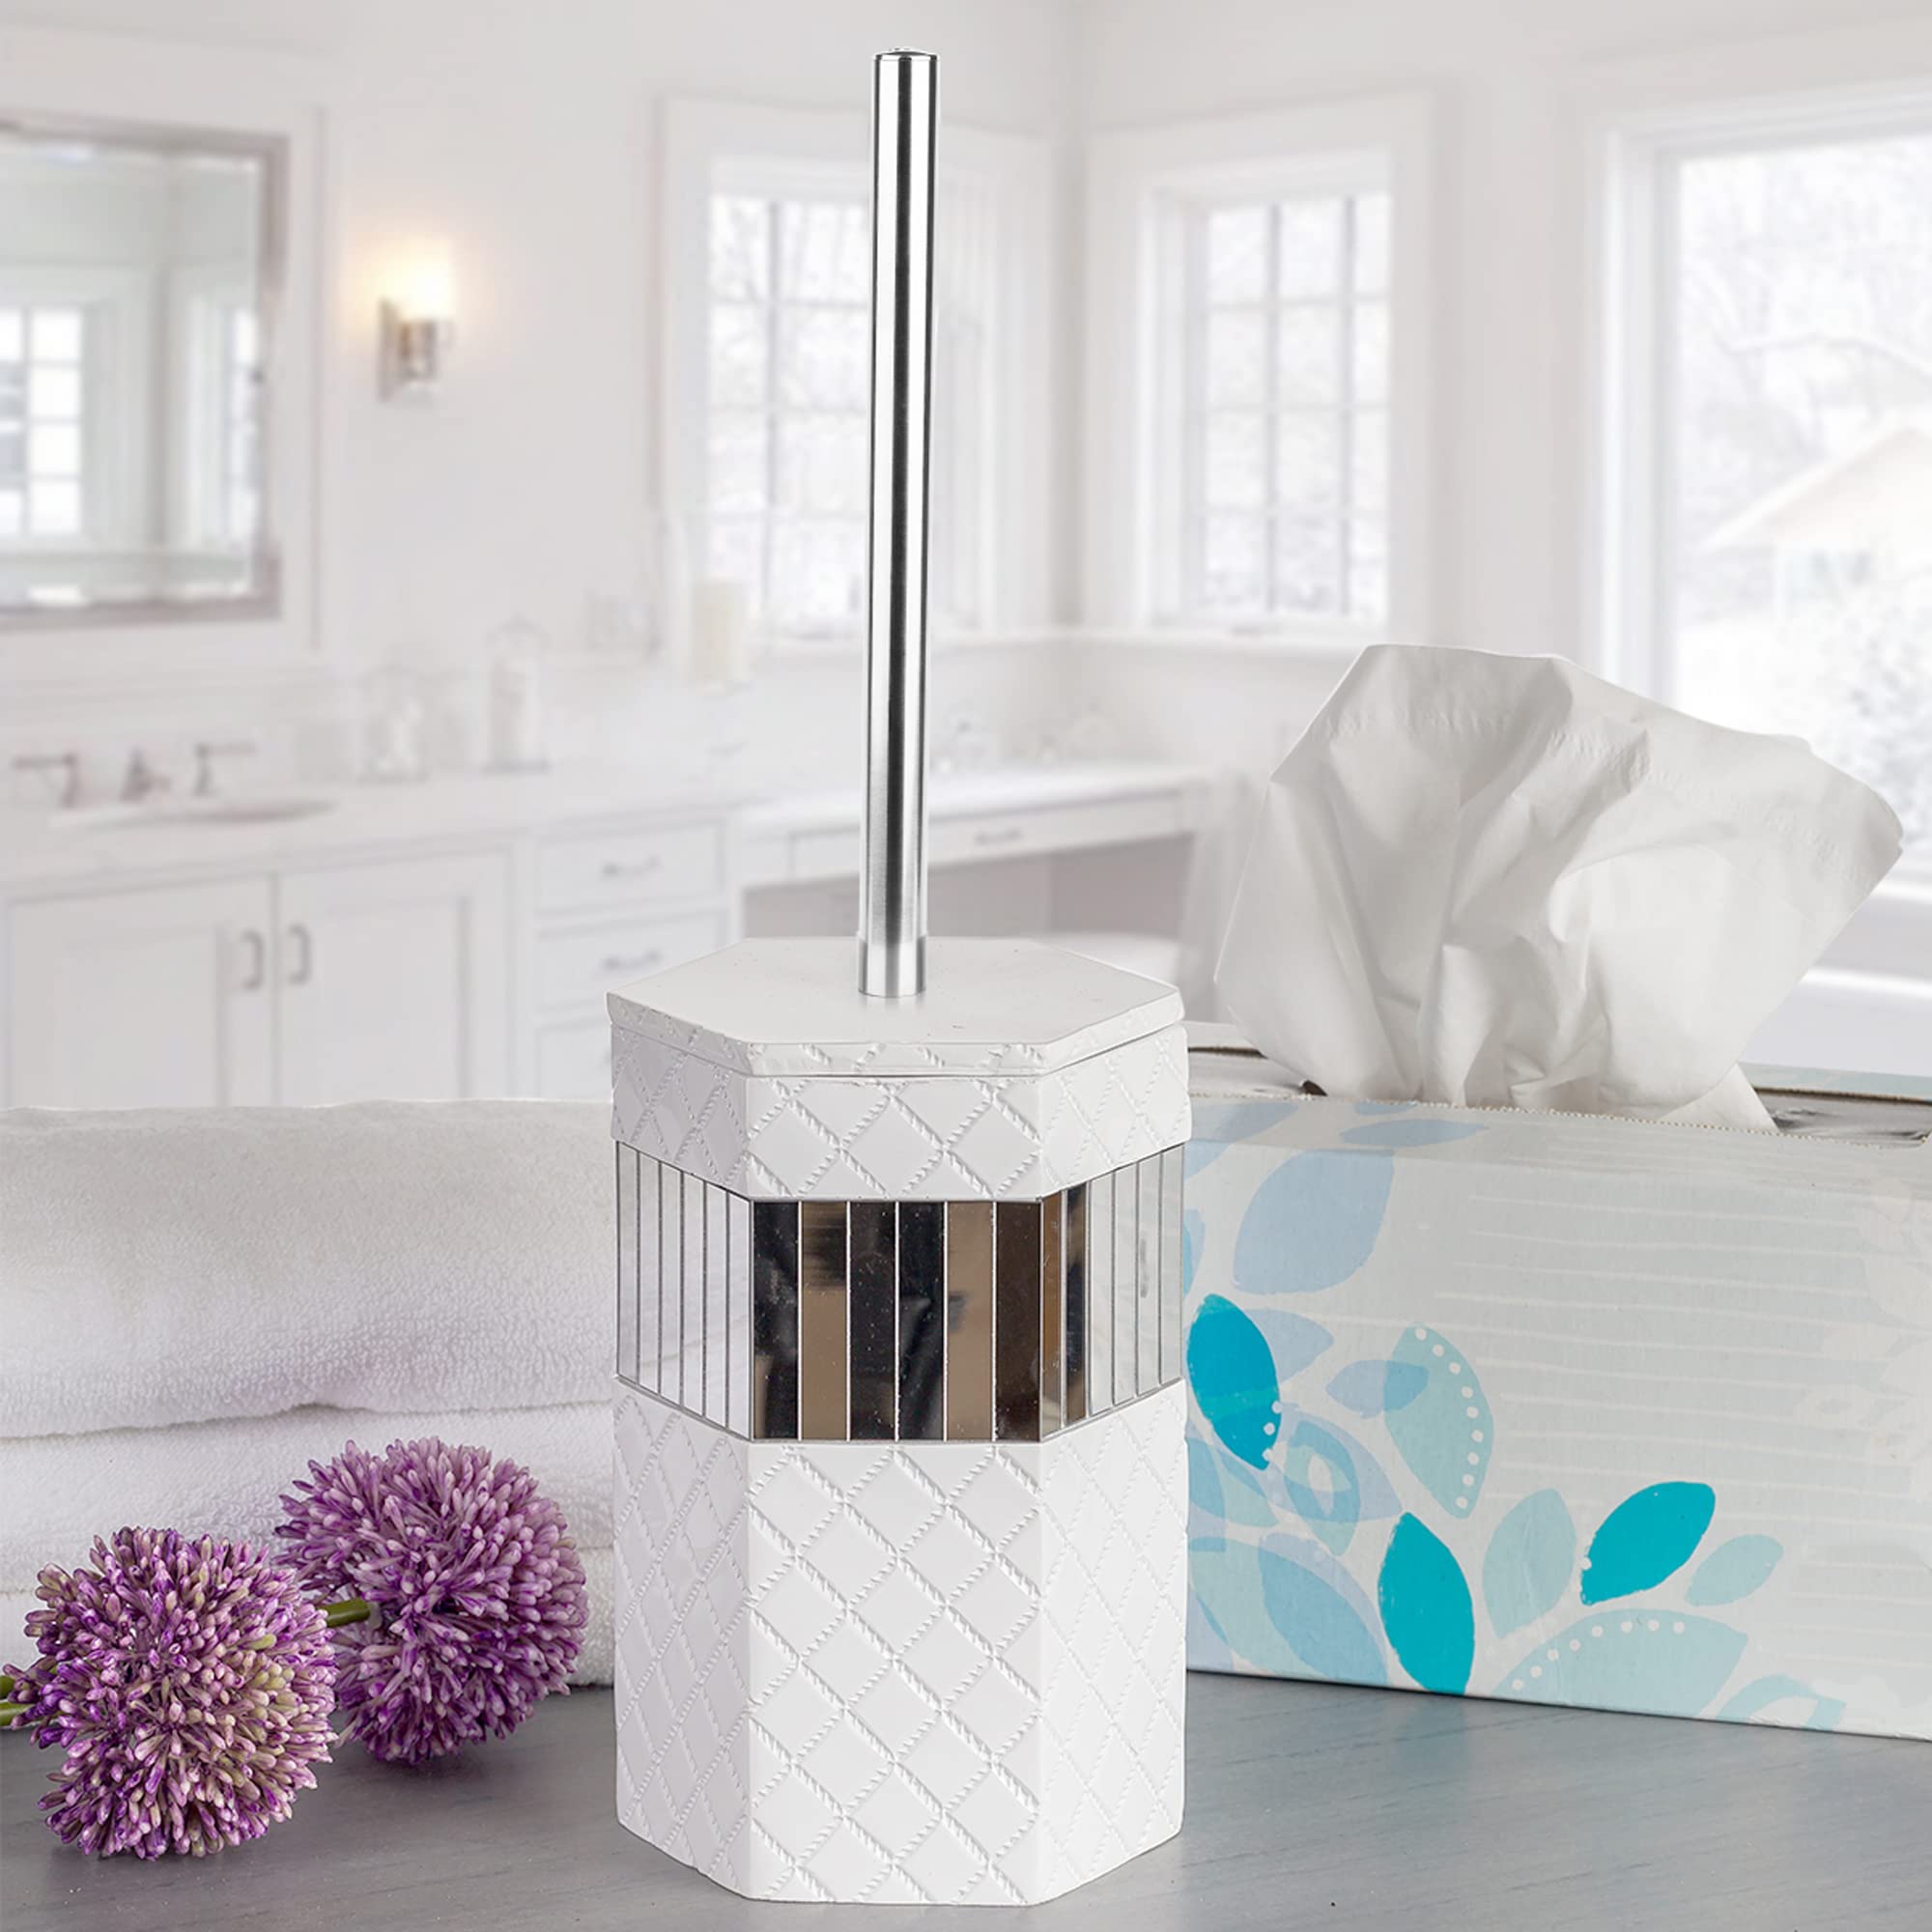 Creative Scents Bathroom Toilet Brush Set - White Toilet Bowl Brush and Holder - Good Grip Toilet Bowl Cleaner Brush and Holder - Decorative Compact Toilet Bowl Scrubber (Quilted Mirror Collection)  - Like New